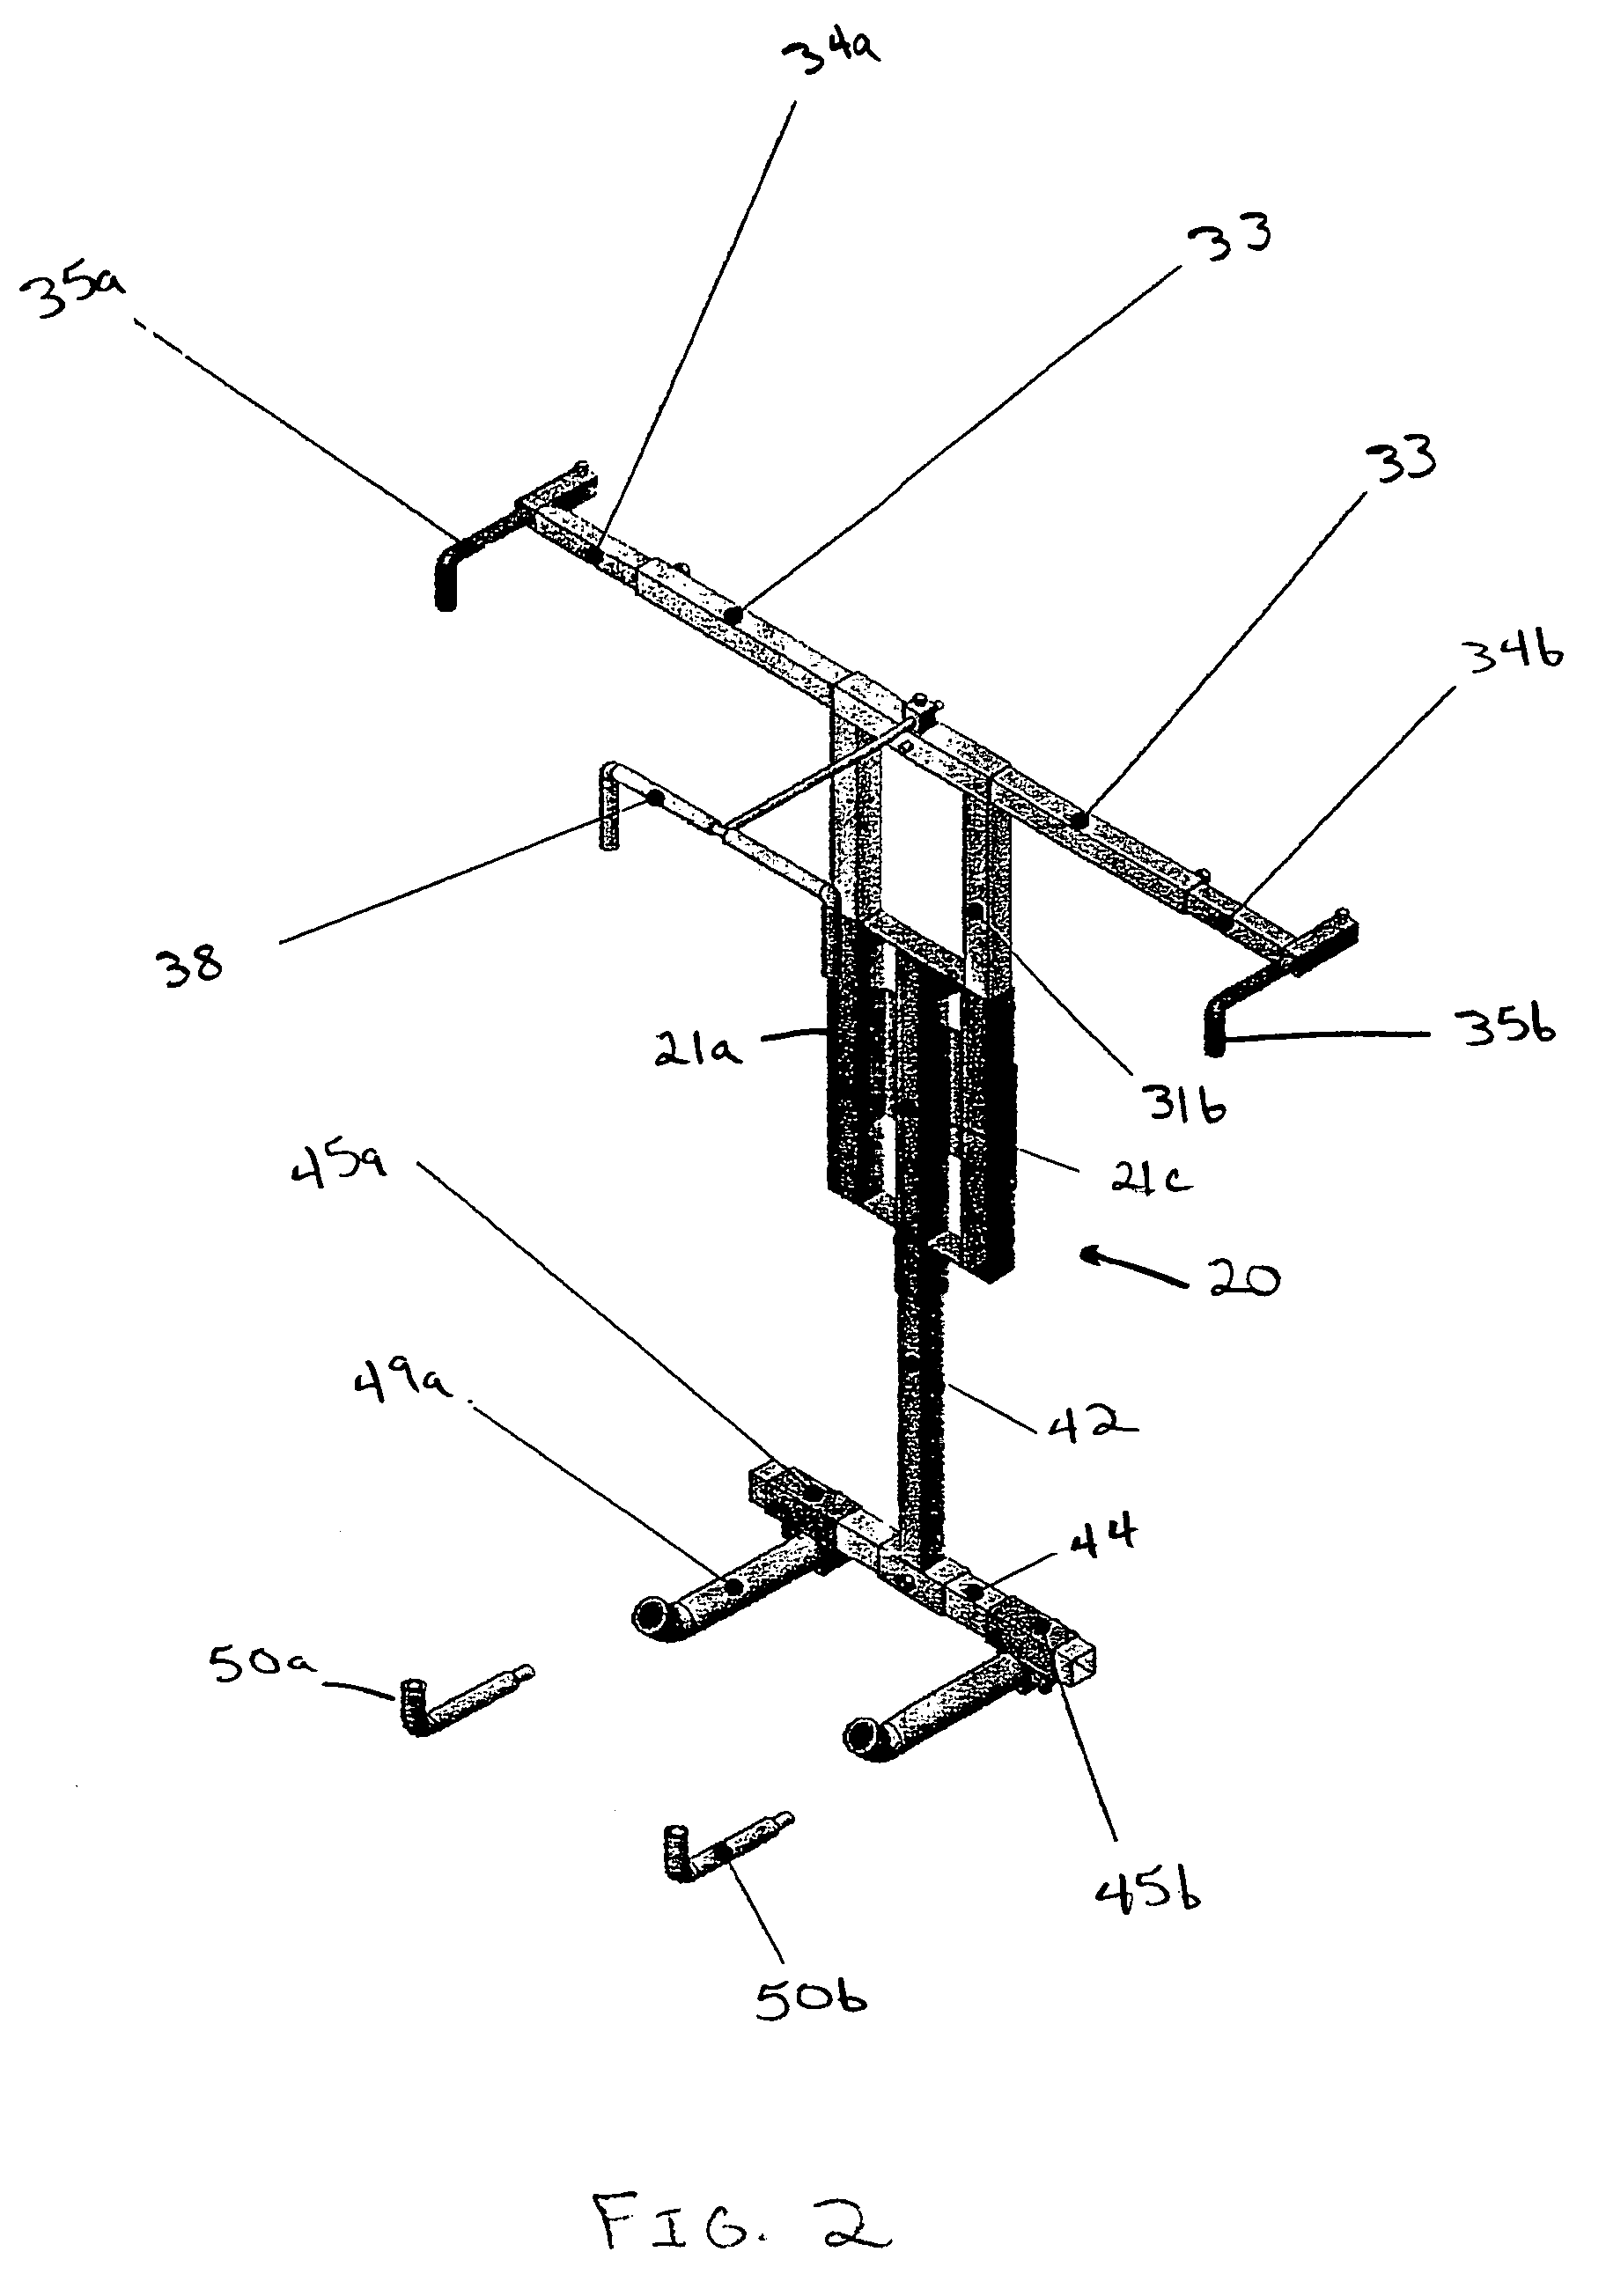 Apparatus for assisting in the removal and installation of vehicle components